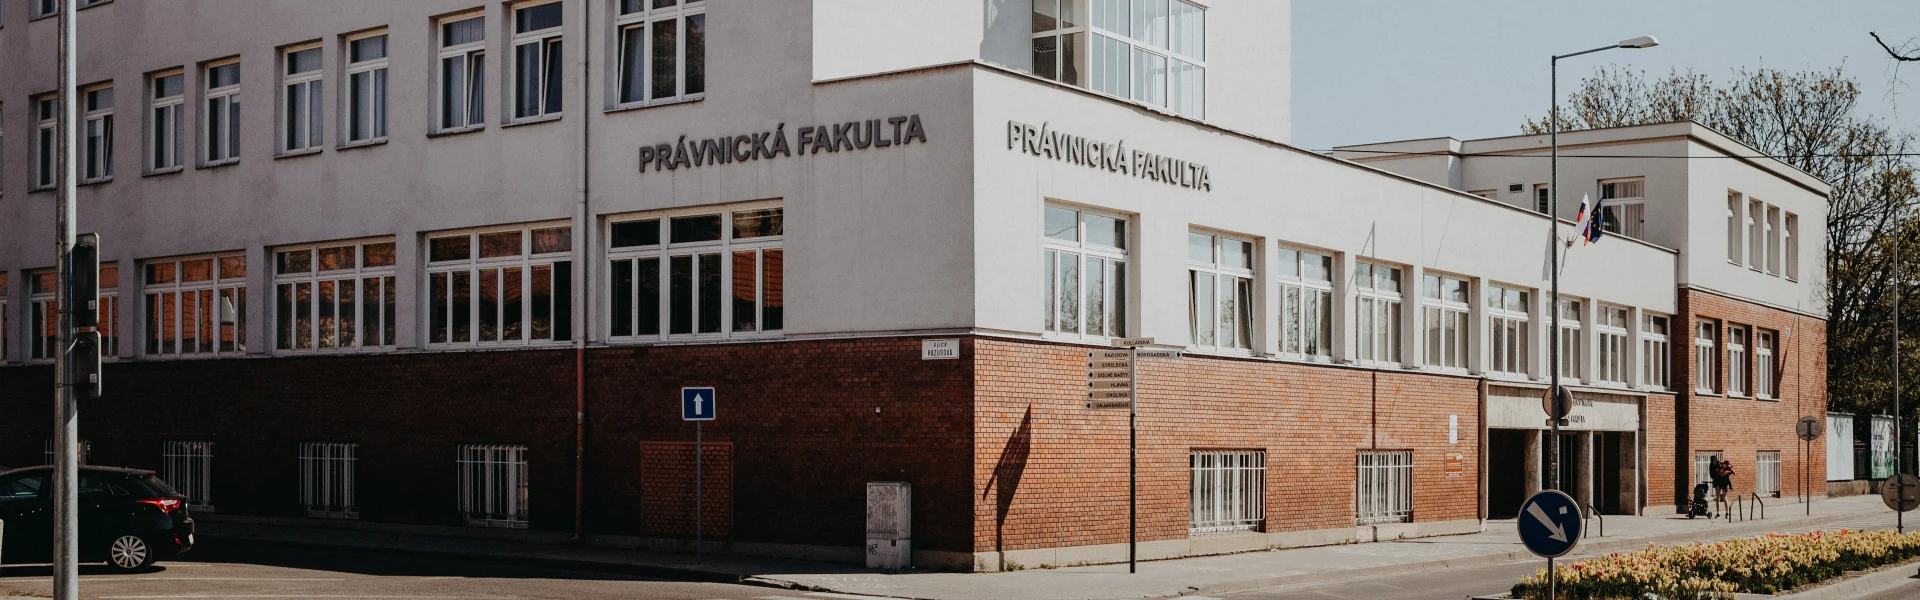 banner-faculty